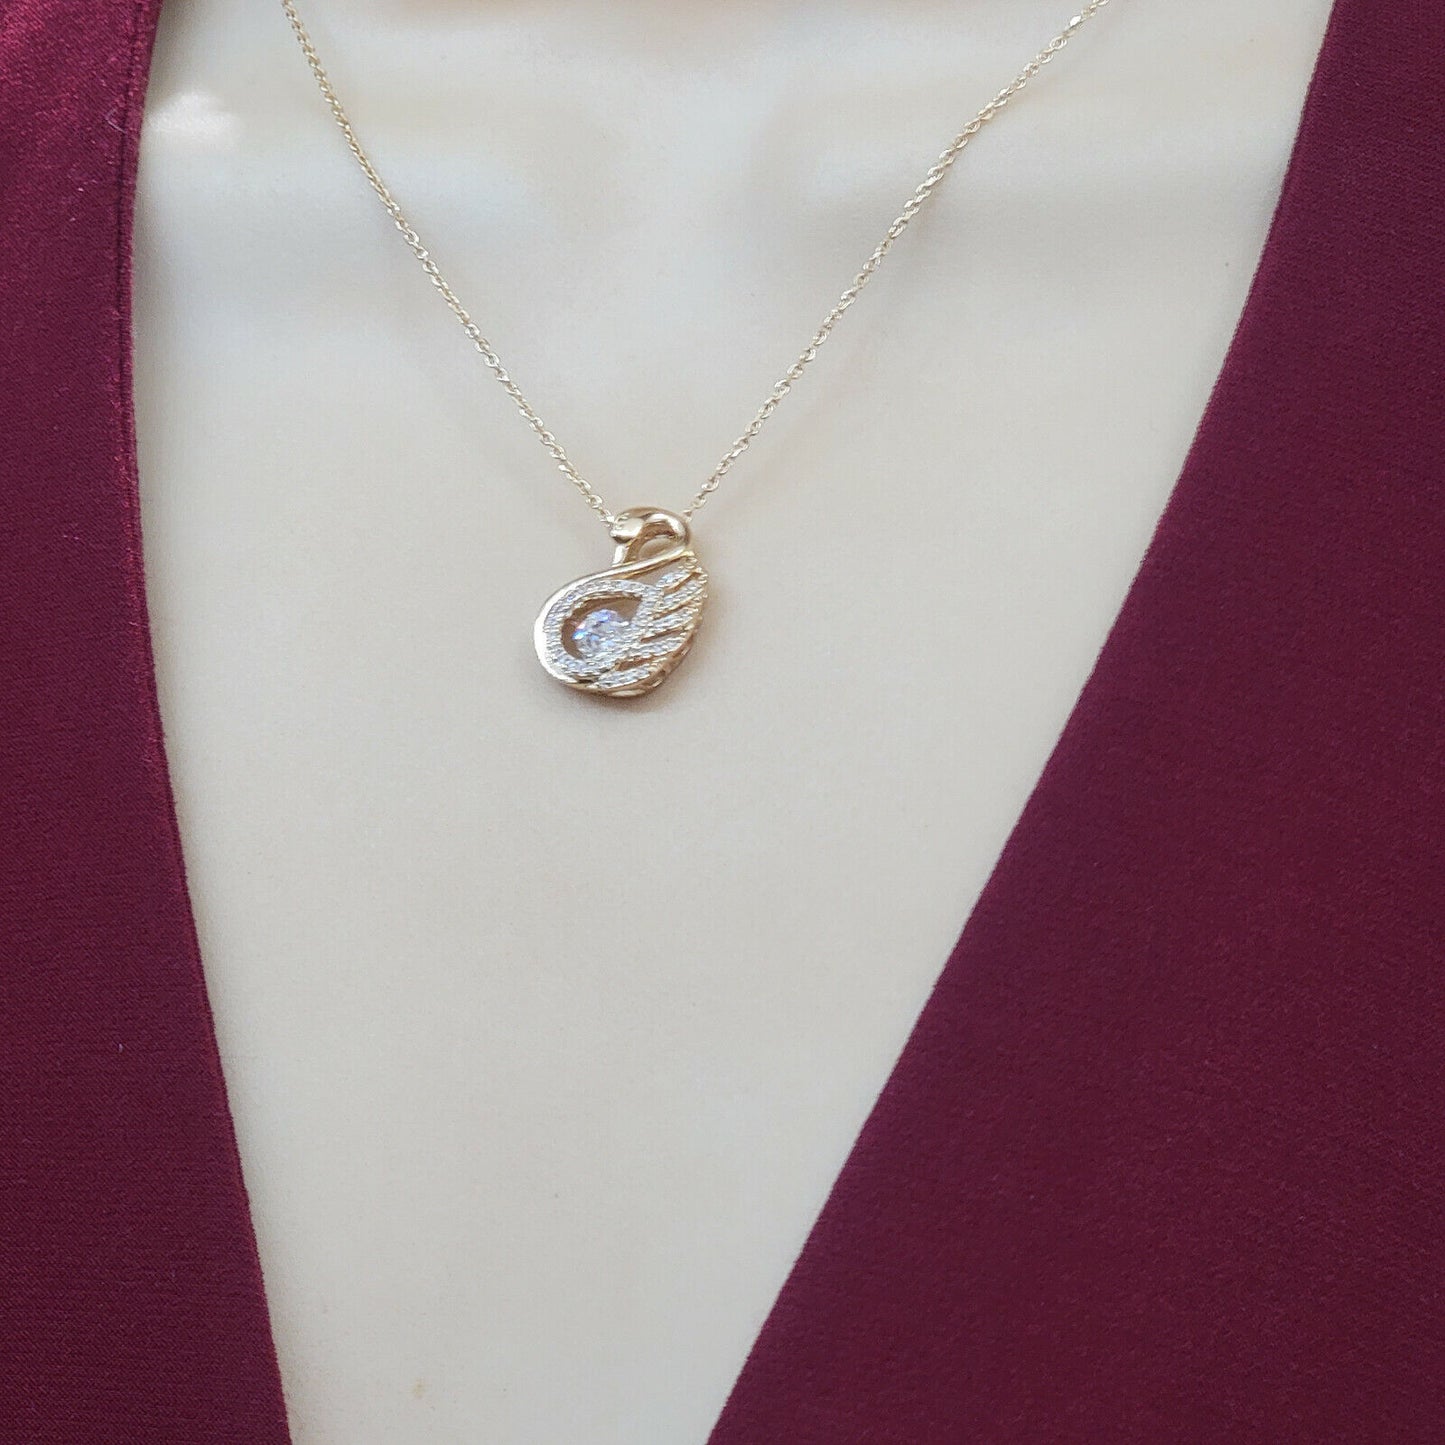 Necklaces - 18K Gold Plated. Clear Crystal Swan Pendant & Chain. Sparkle